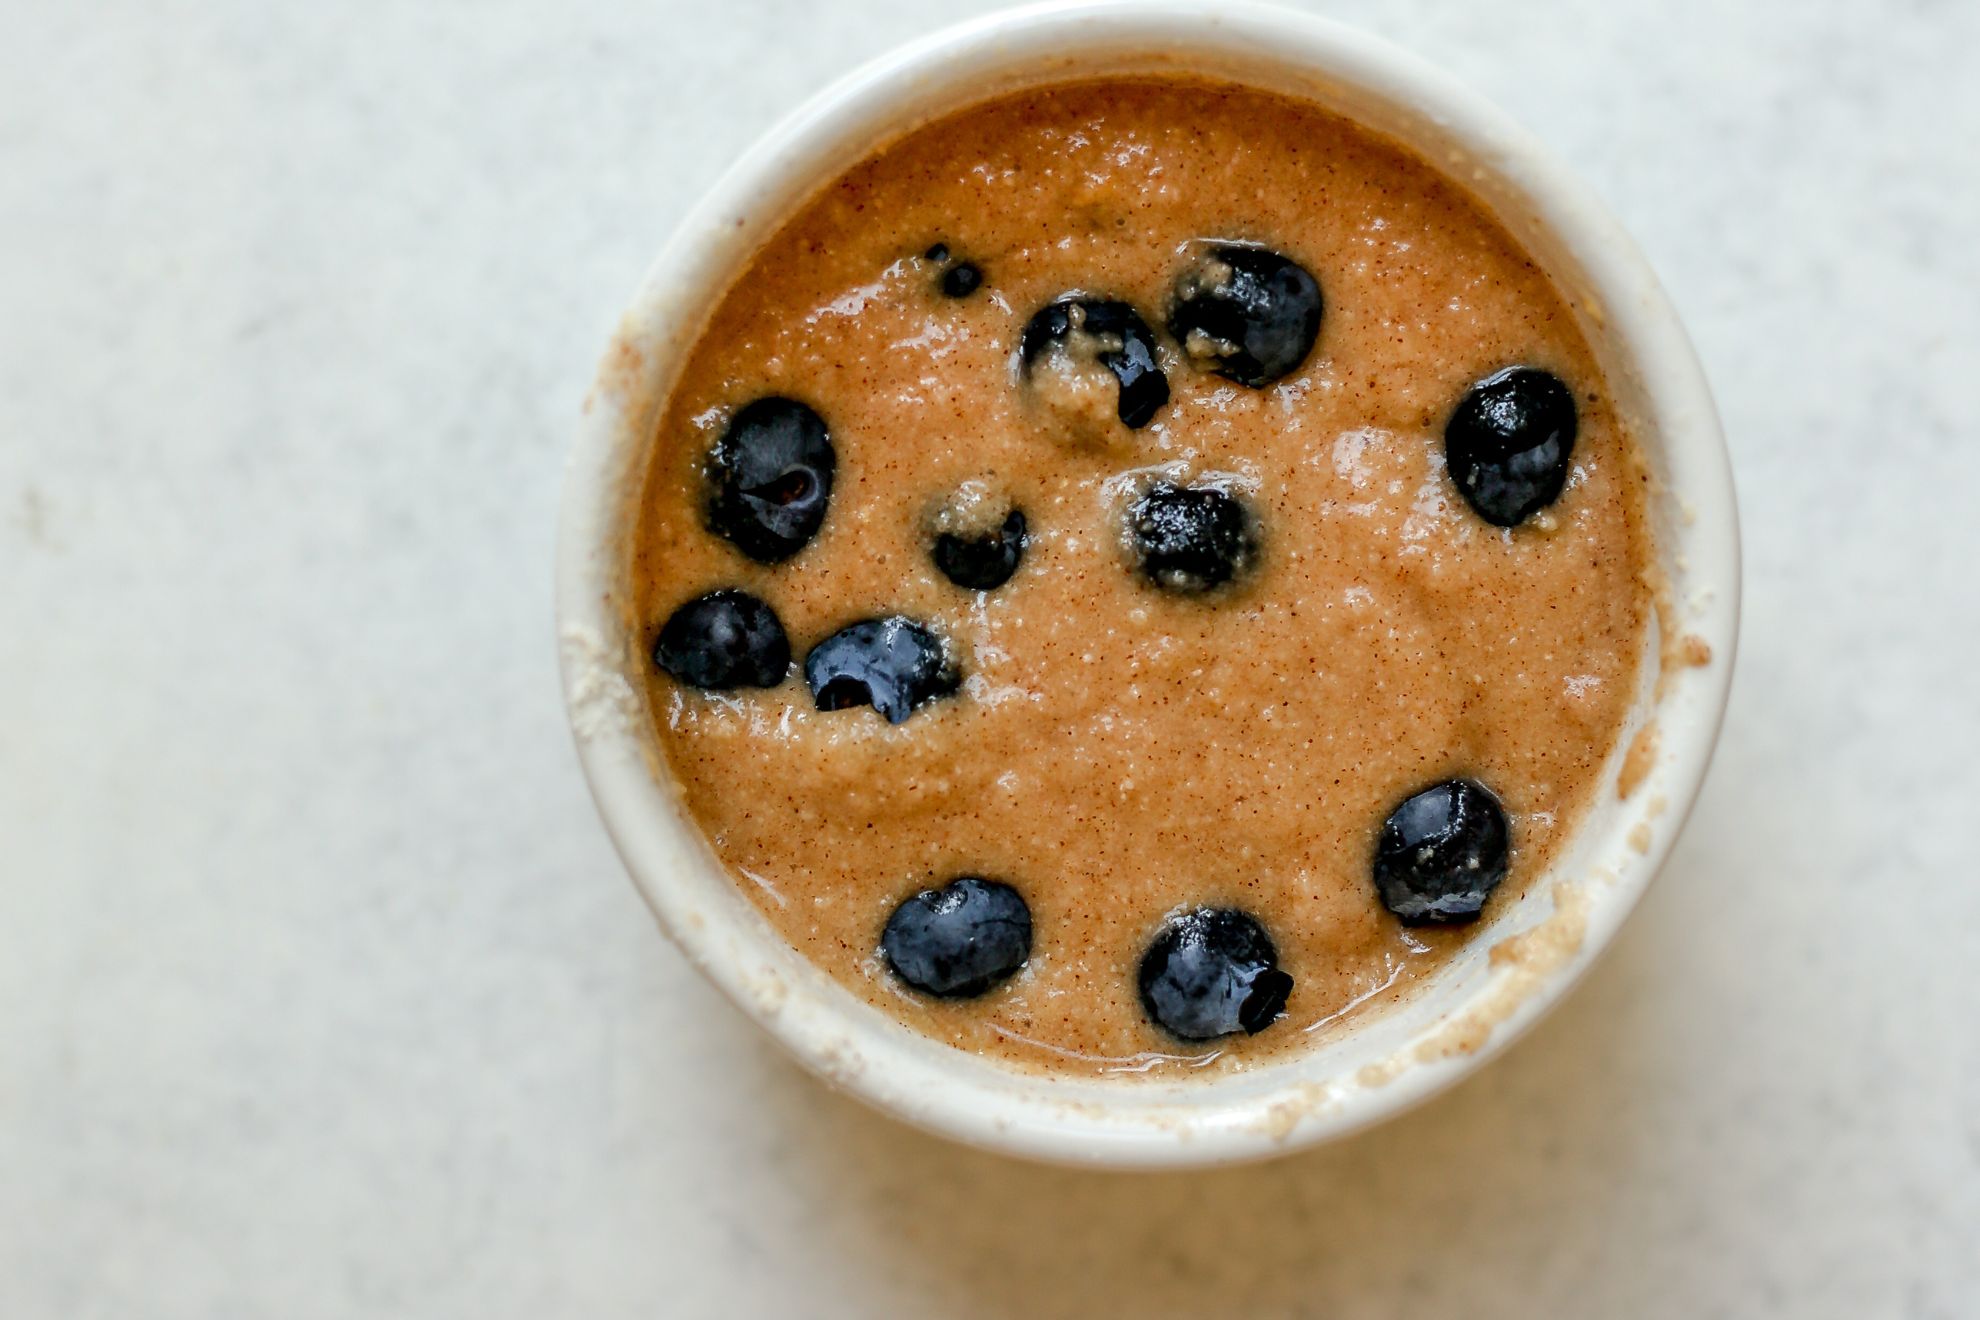 This is an overhead horizontal image of a small white bowl with raw muffin batter and blueberries on top of it. The bowl sits on a white surface.